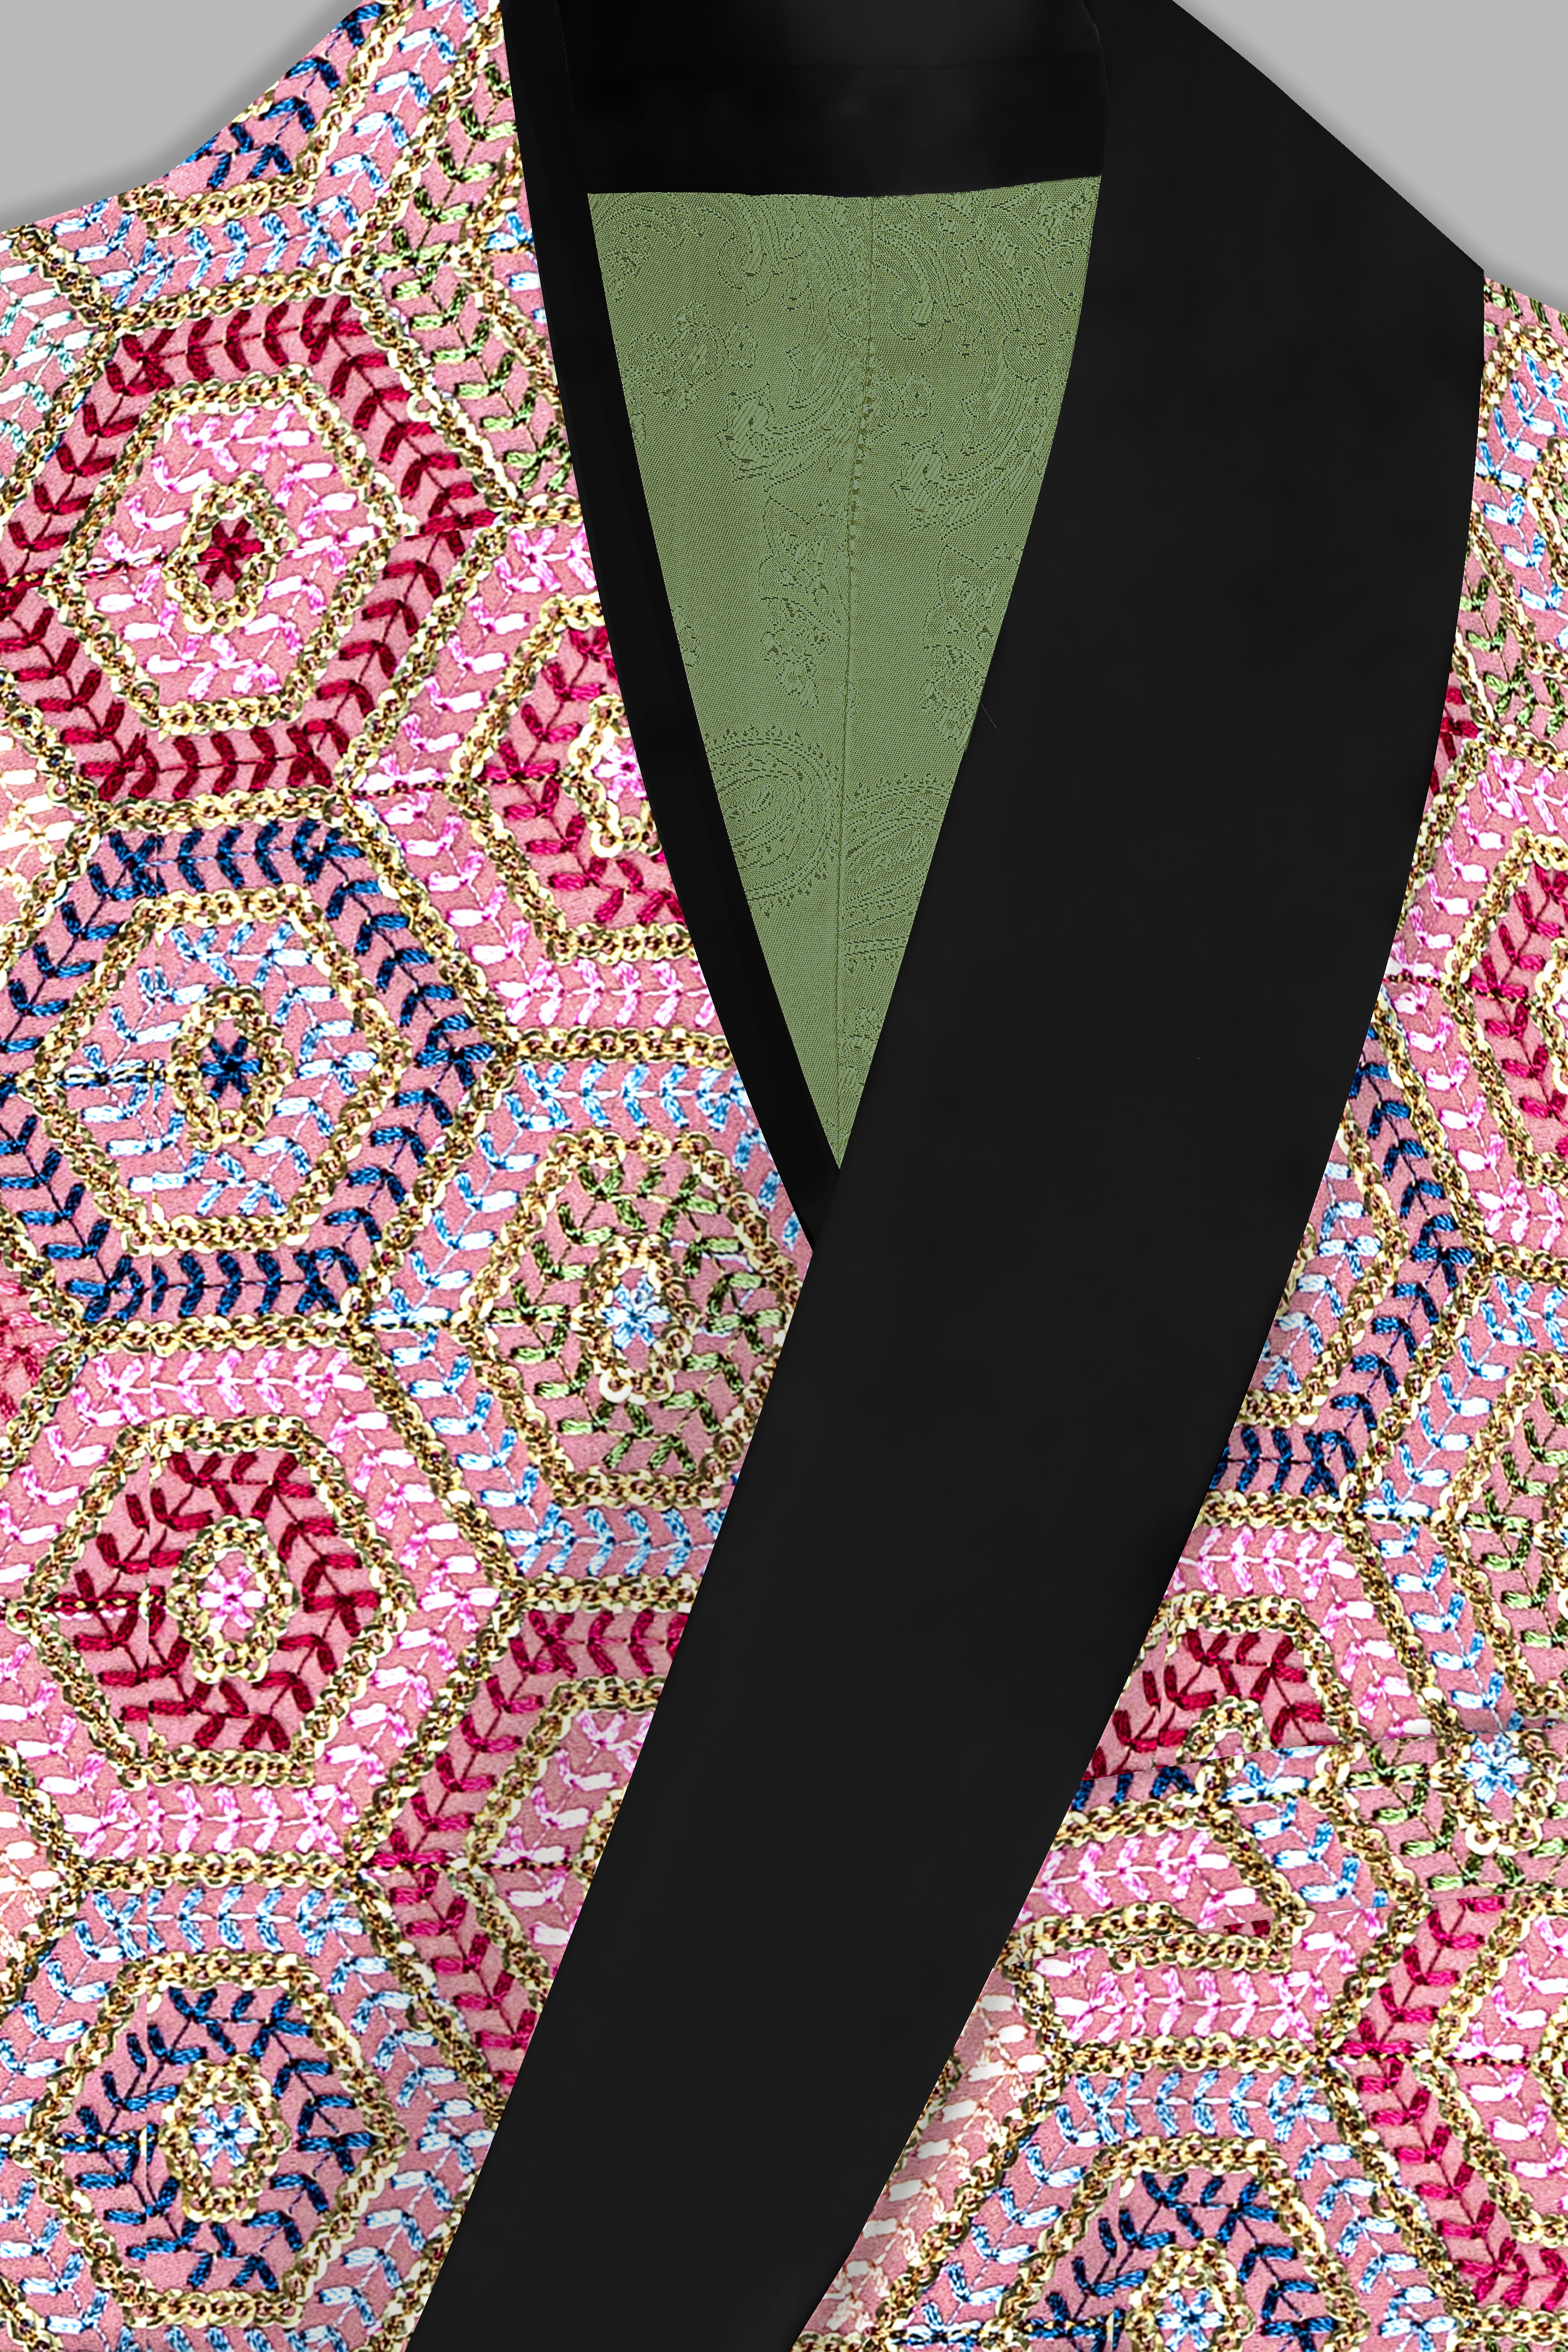 Radical Pink and Rhino Blue Multicolour Thread and Sequin Embroidered Tuxedo Blazer BL3693-BKL-36, BL3693-BKL-38, BL3693-BKL-40, BL3693-BKL-42, BL3693-BKL-44, BL3693-BKL-46, BL3693-BKL-48, BL3693-BKL-50, BL3693-BKL-52, BL3693-BKL-54, BL3693-BKL-56, BL3693-BKL-58, BL3693-BKL-60